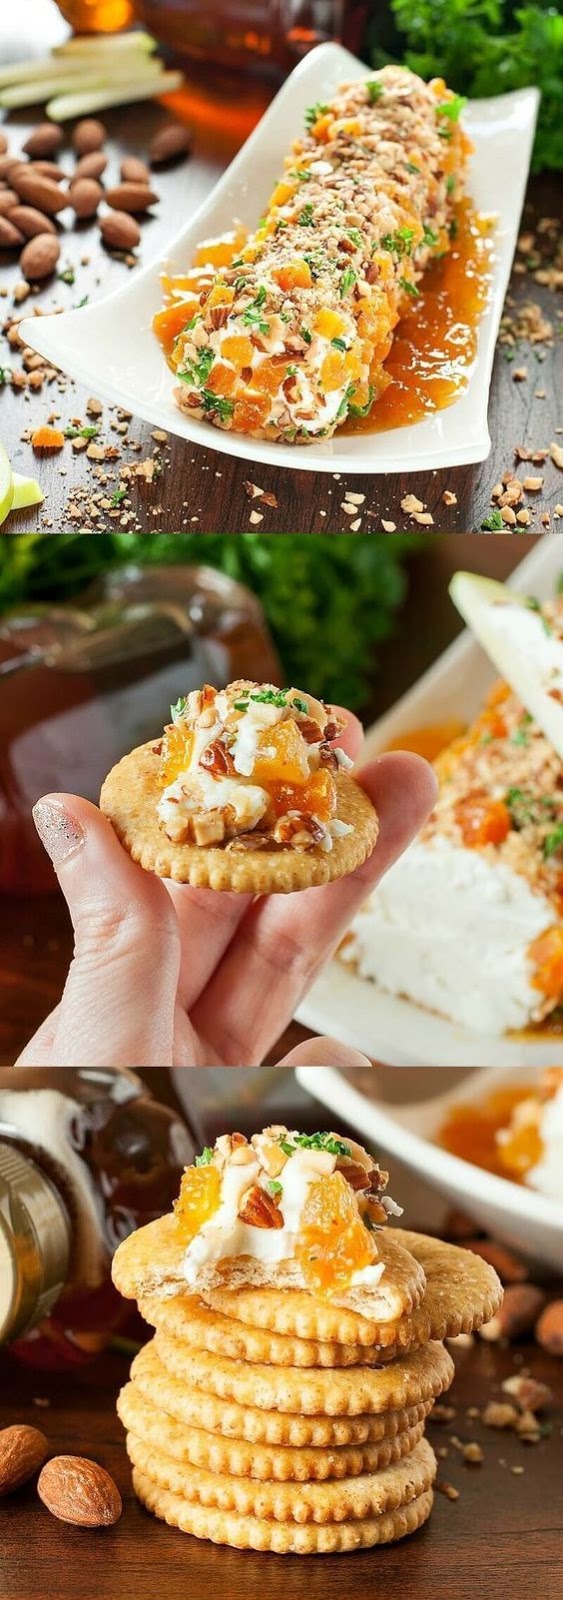 Honey, Apricot, and Almond Goat Cheese Spread - This easy, cheesy appetizer takes only a few minutes to make!